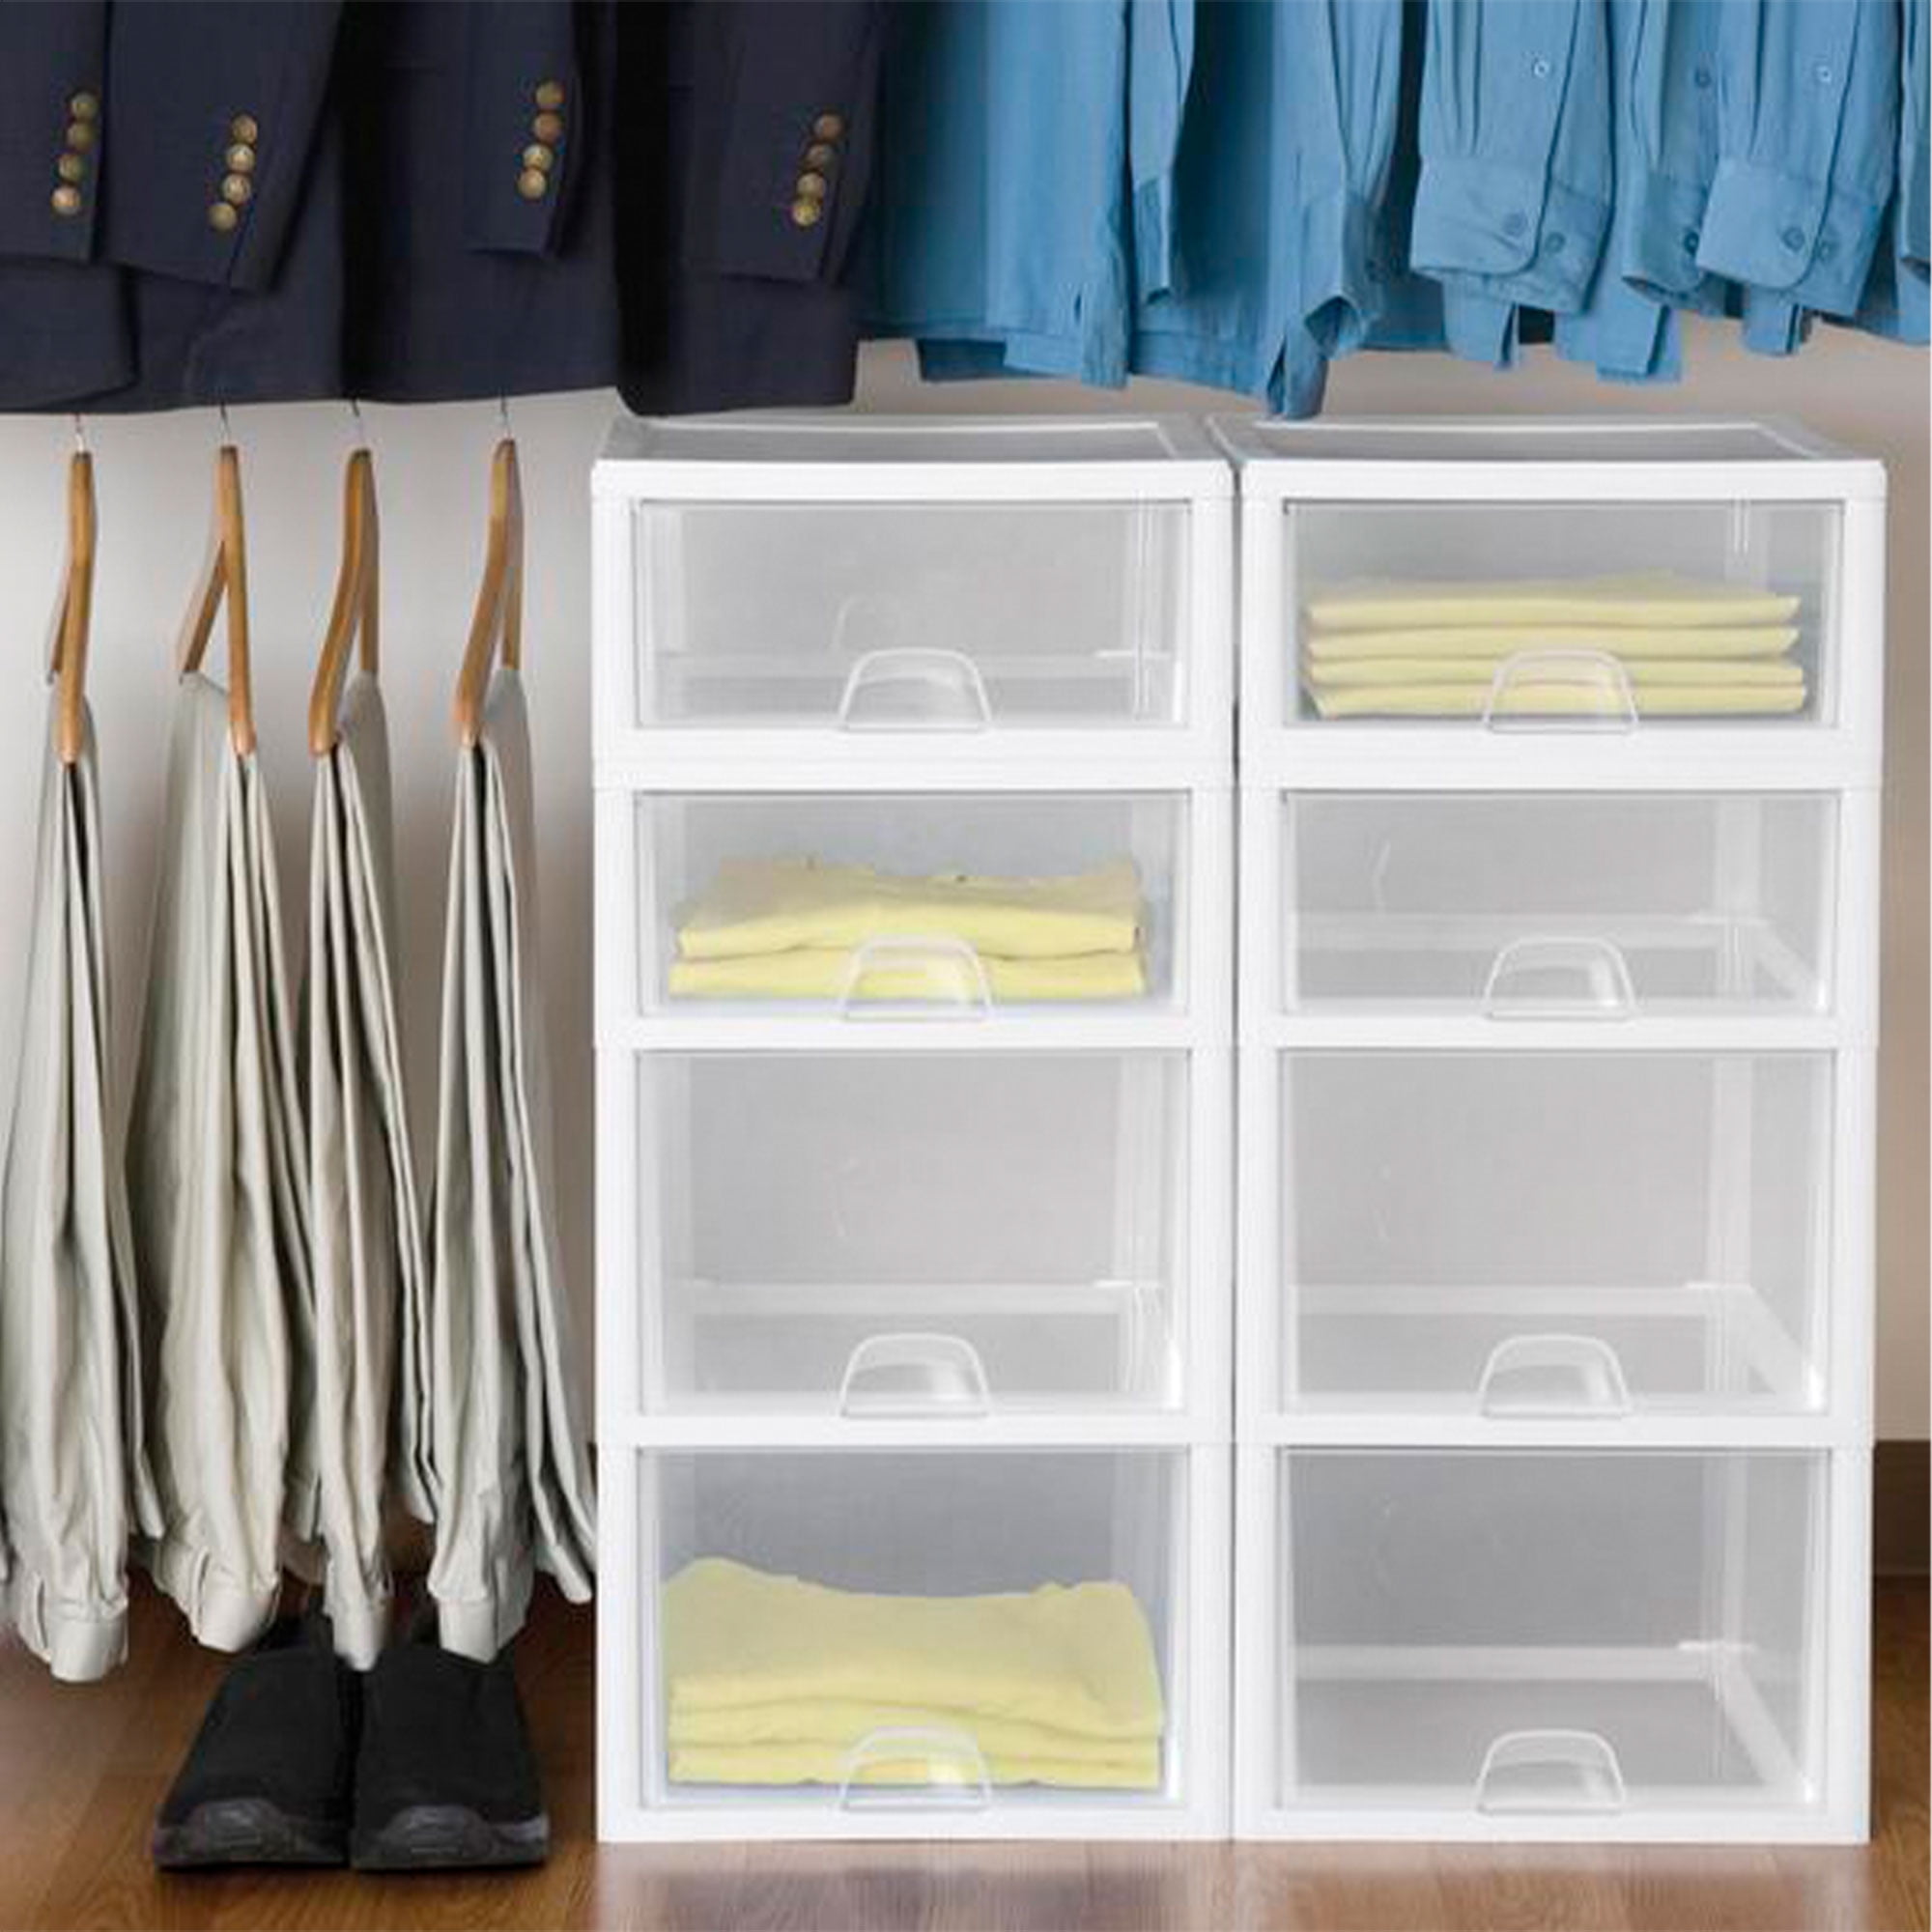 33x2TLx11 Cream Storage Solution Drawer for Large Containers